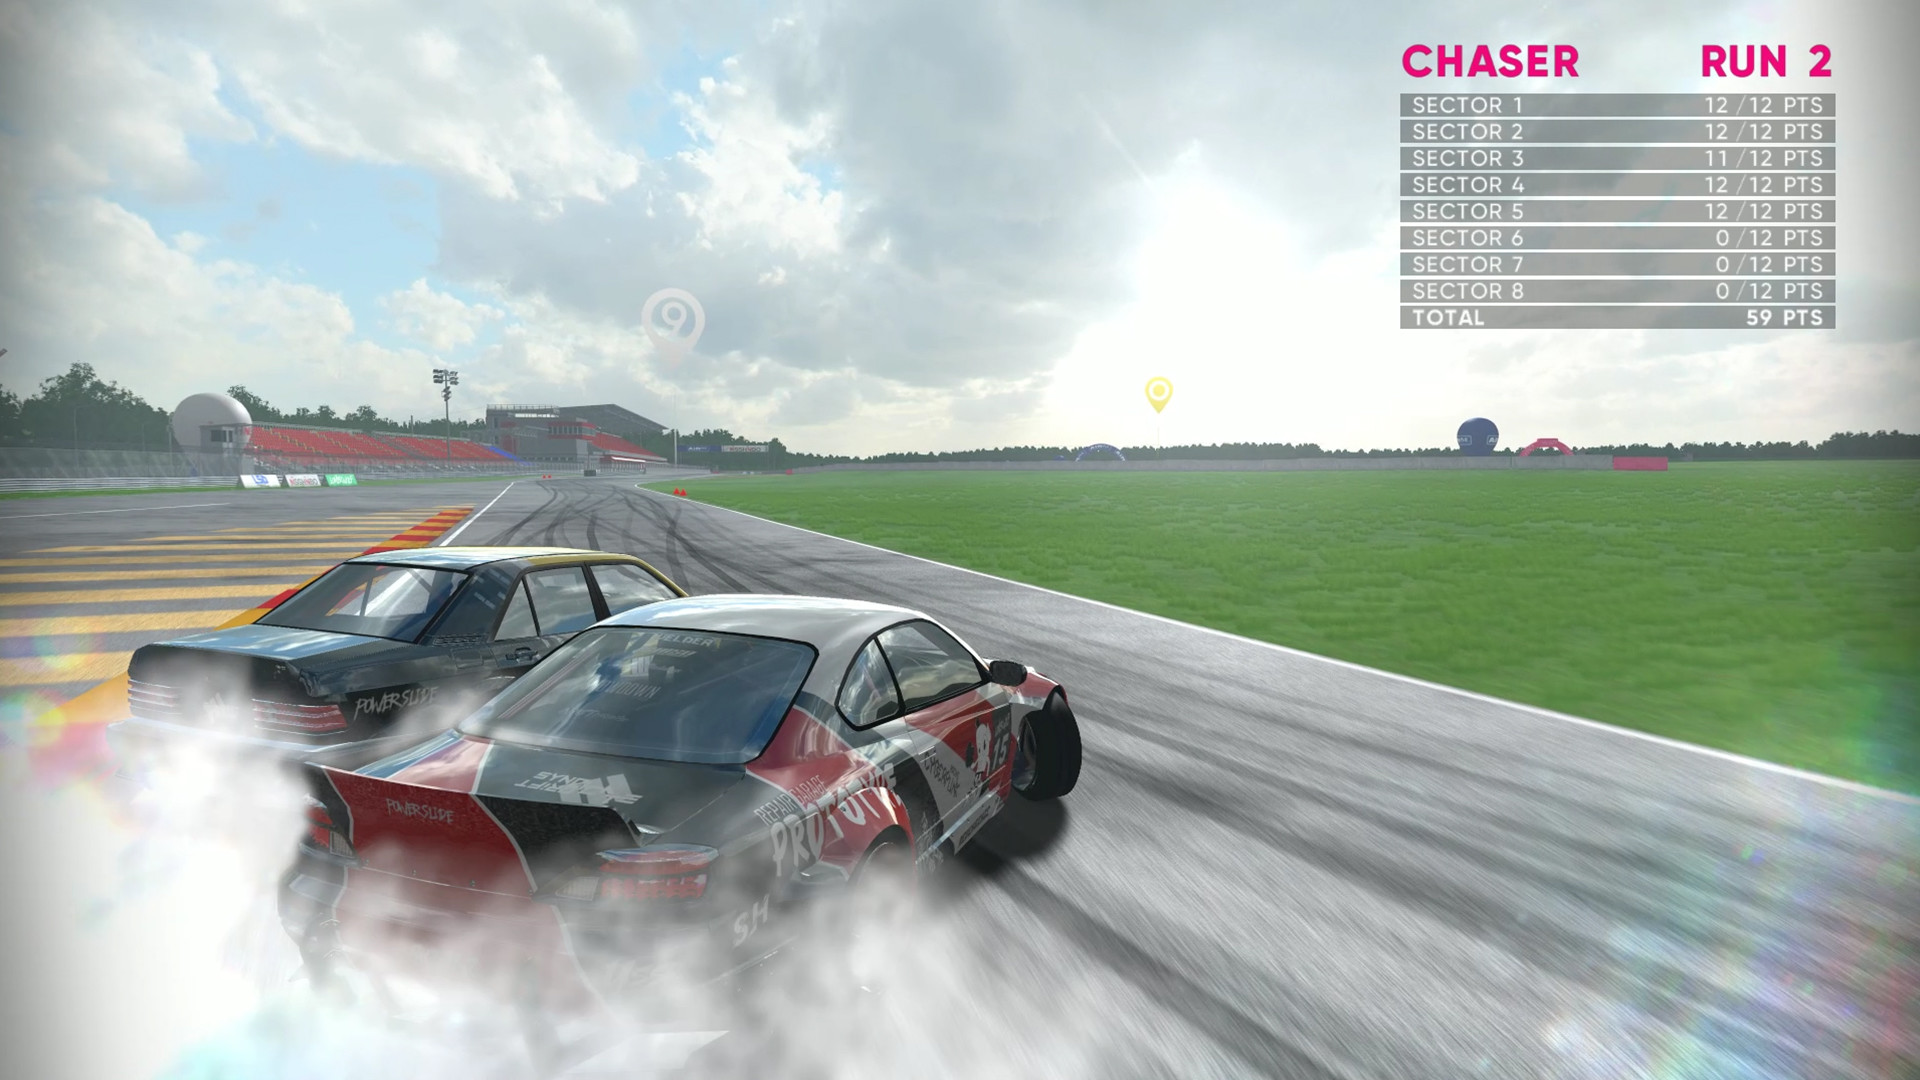 rds-the-official-drift-videogame-pc-screenshot-www.ovagames.com-3